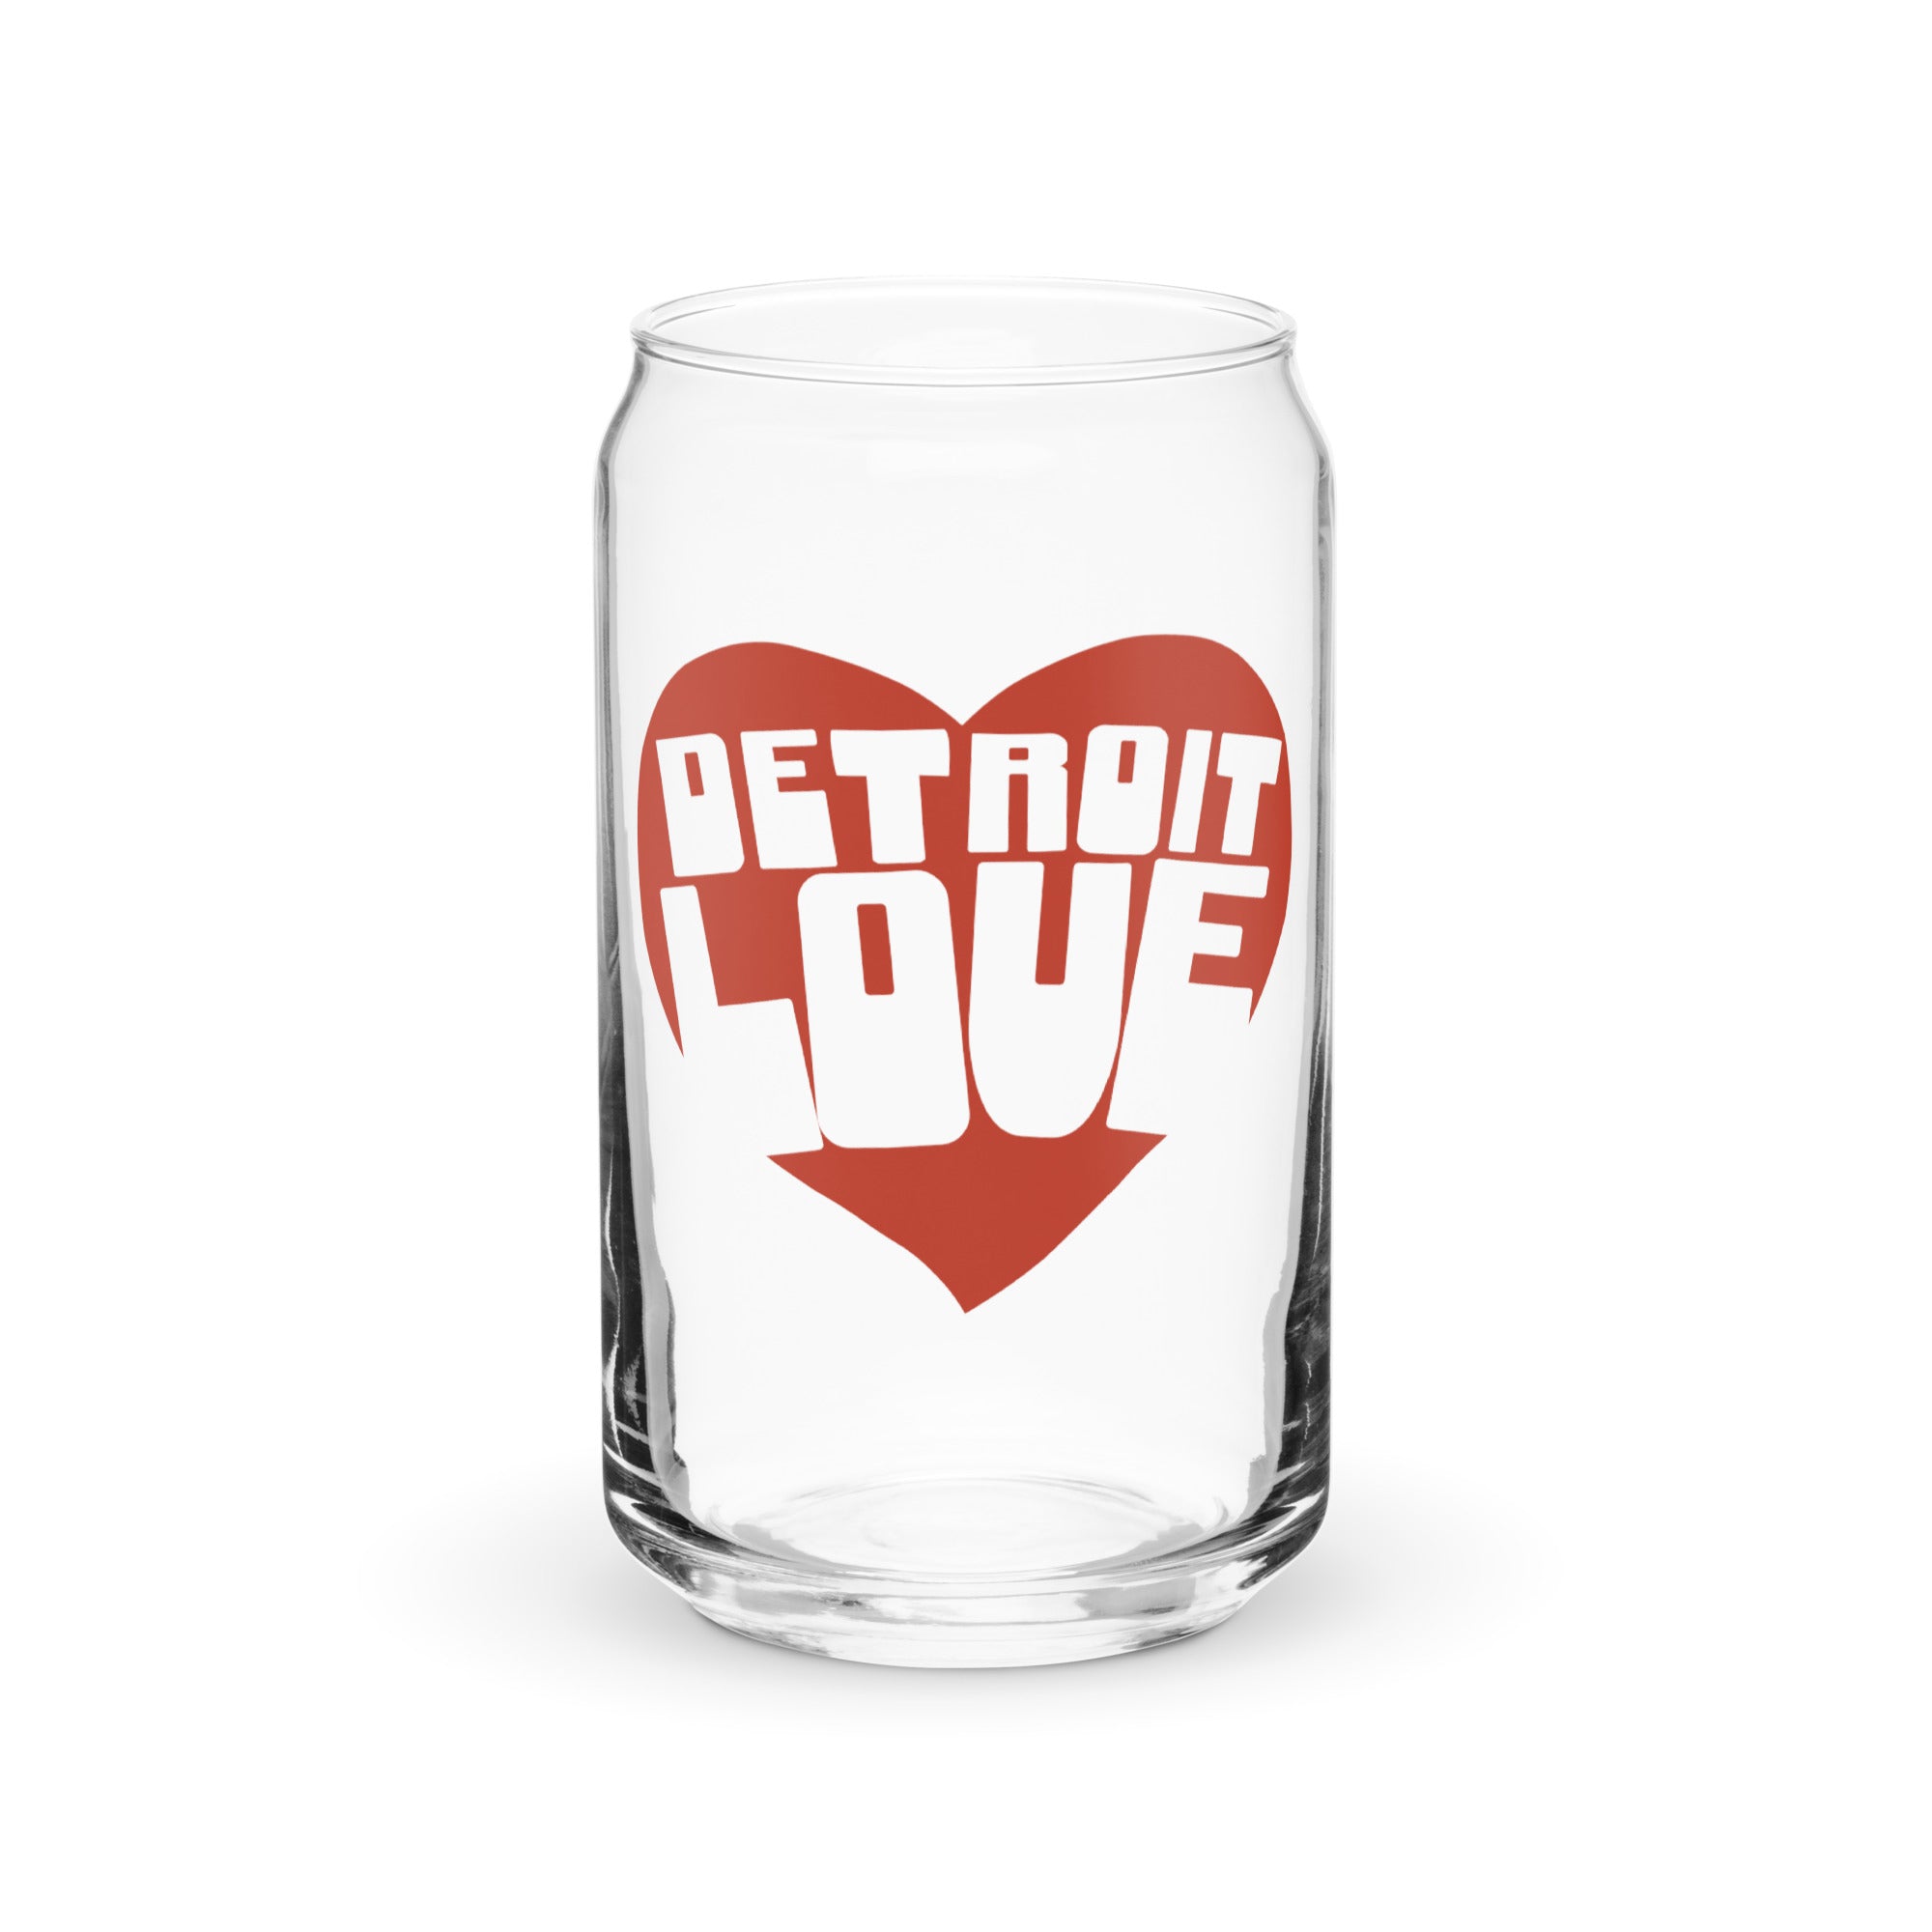 Detroit Love - Can-shaped Glass - 16 oz glass   